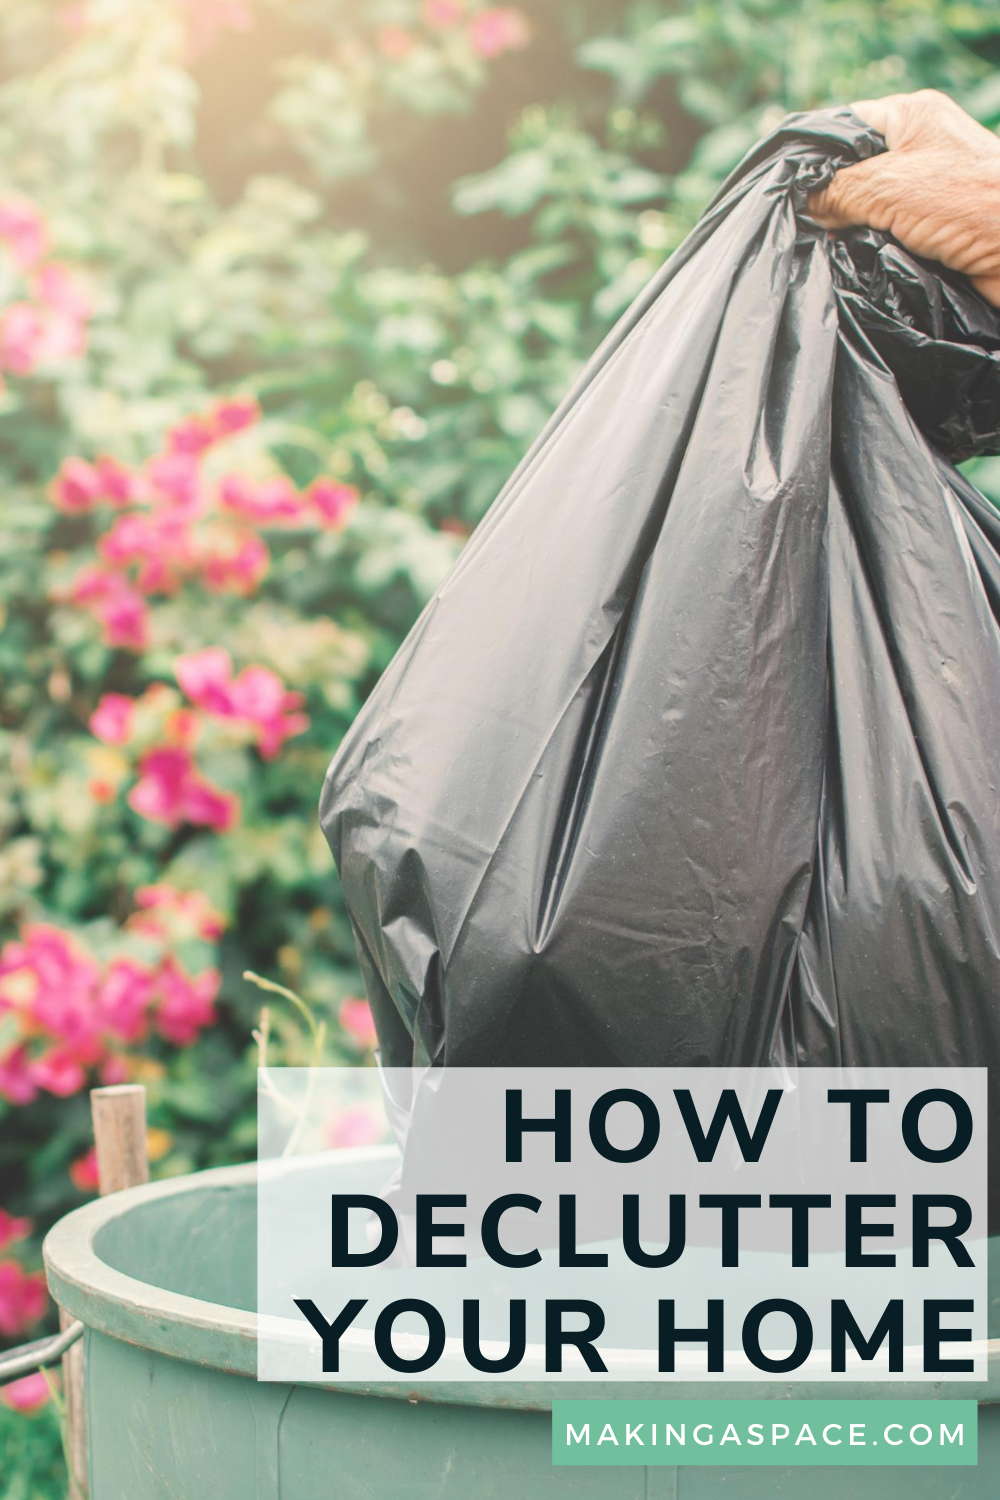 How to Declutter a Home